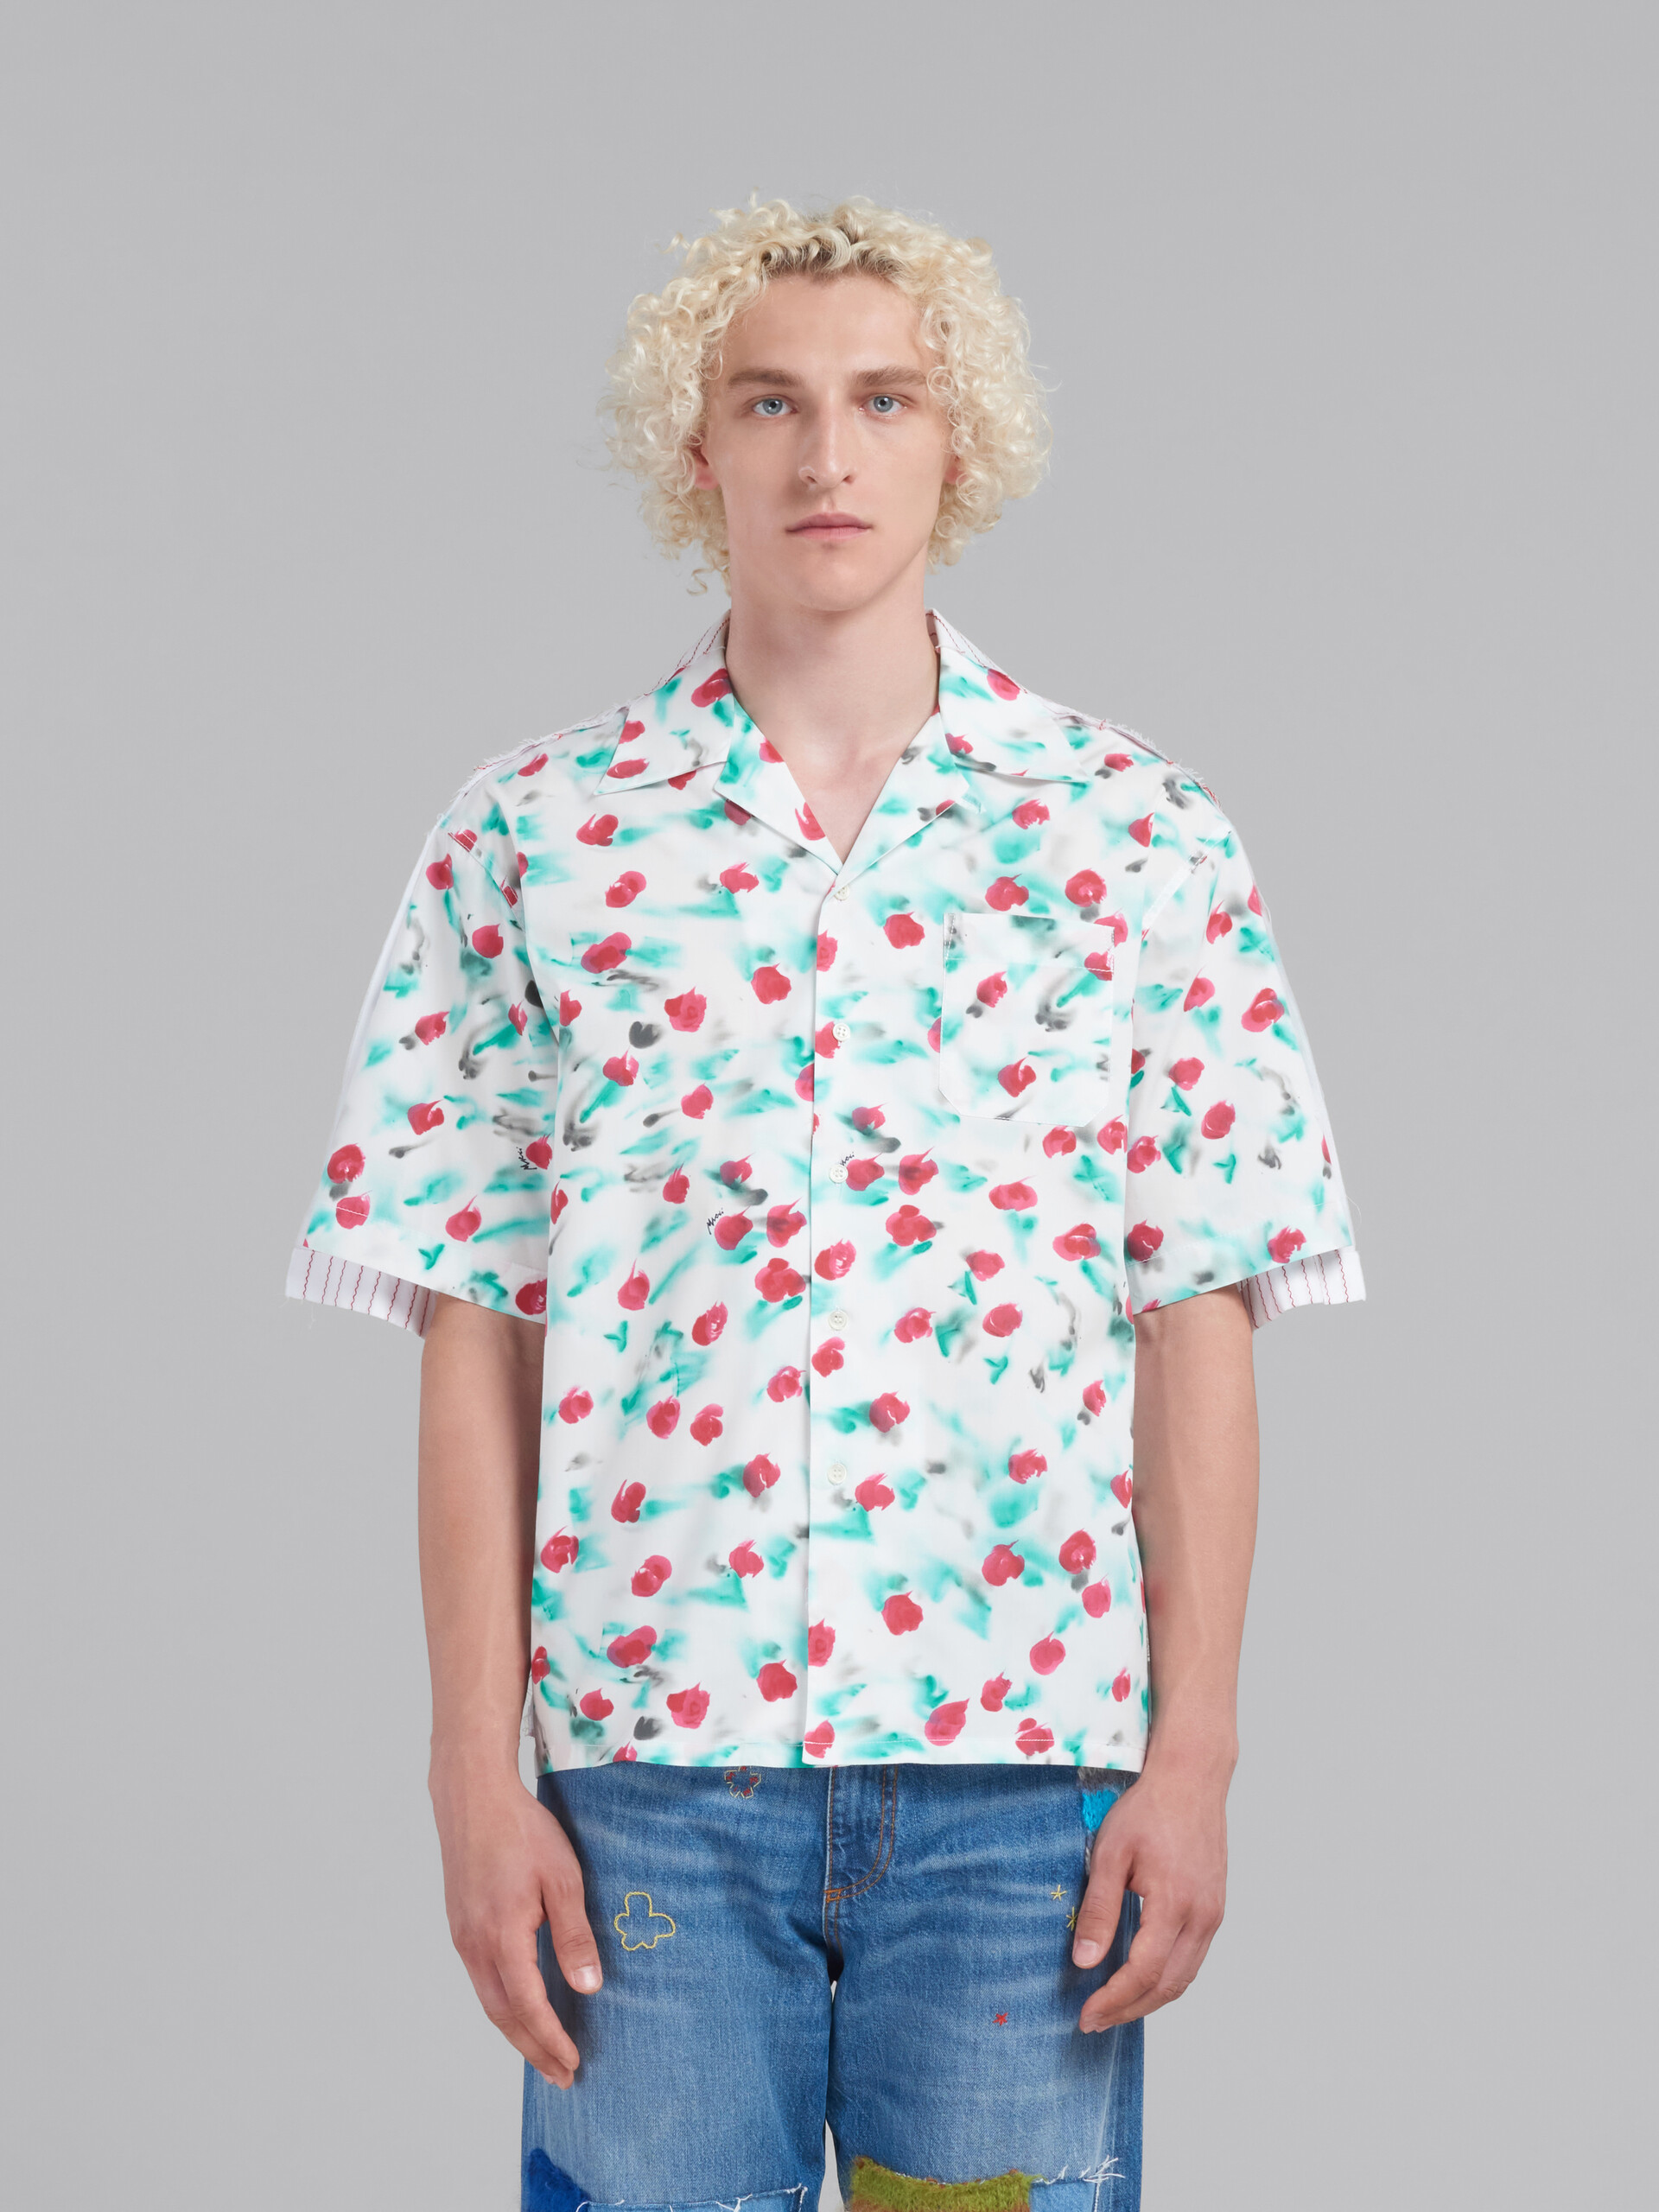 White poplin bowling shirt with contrast back - Shirts - Image 2